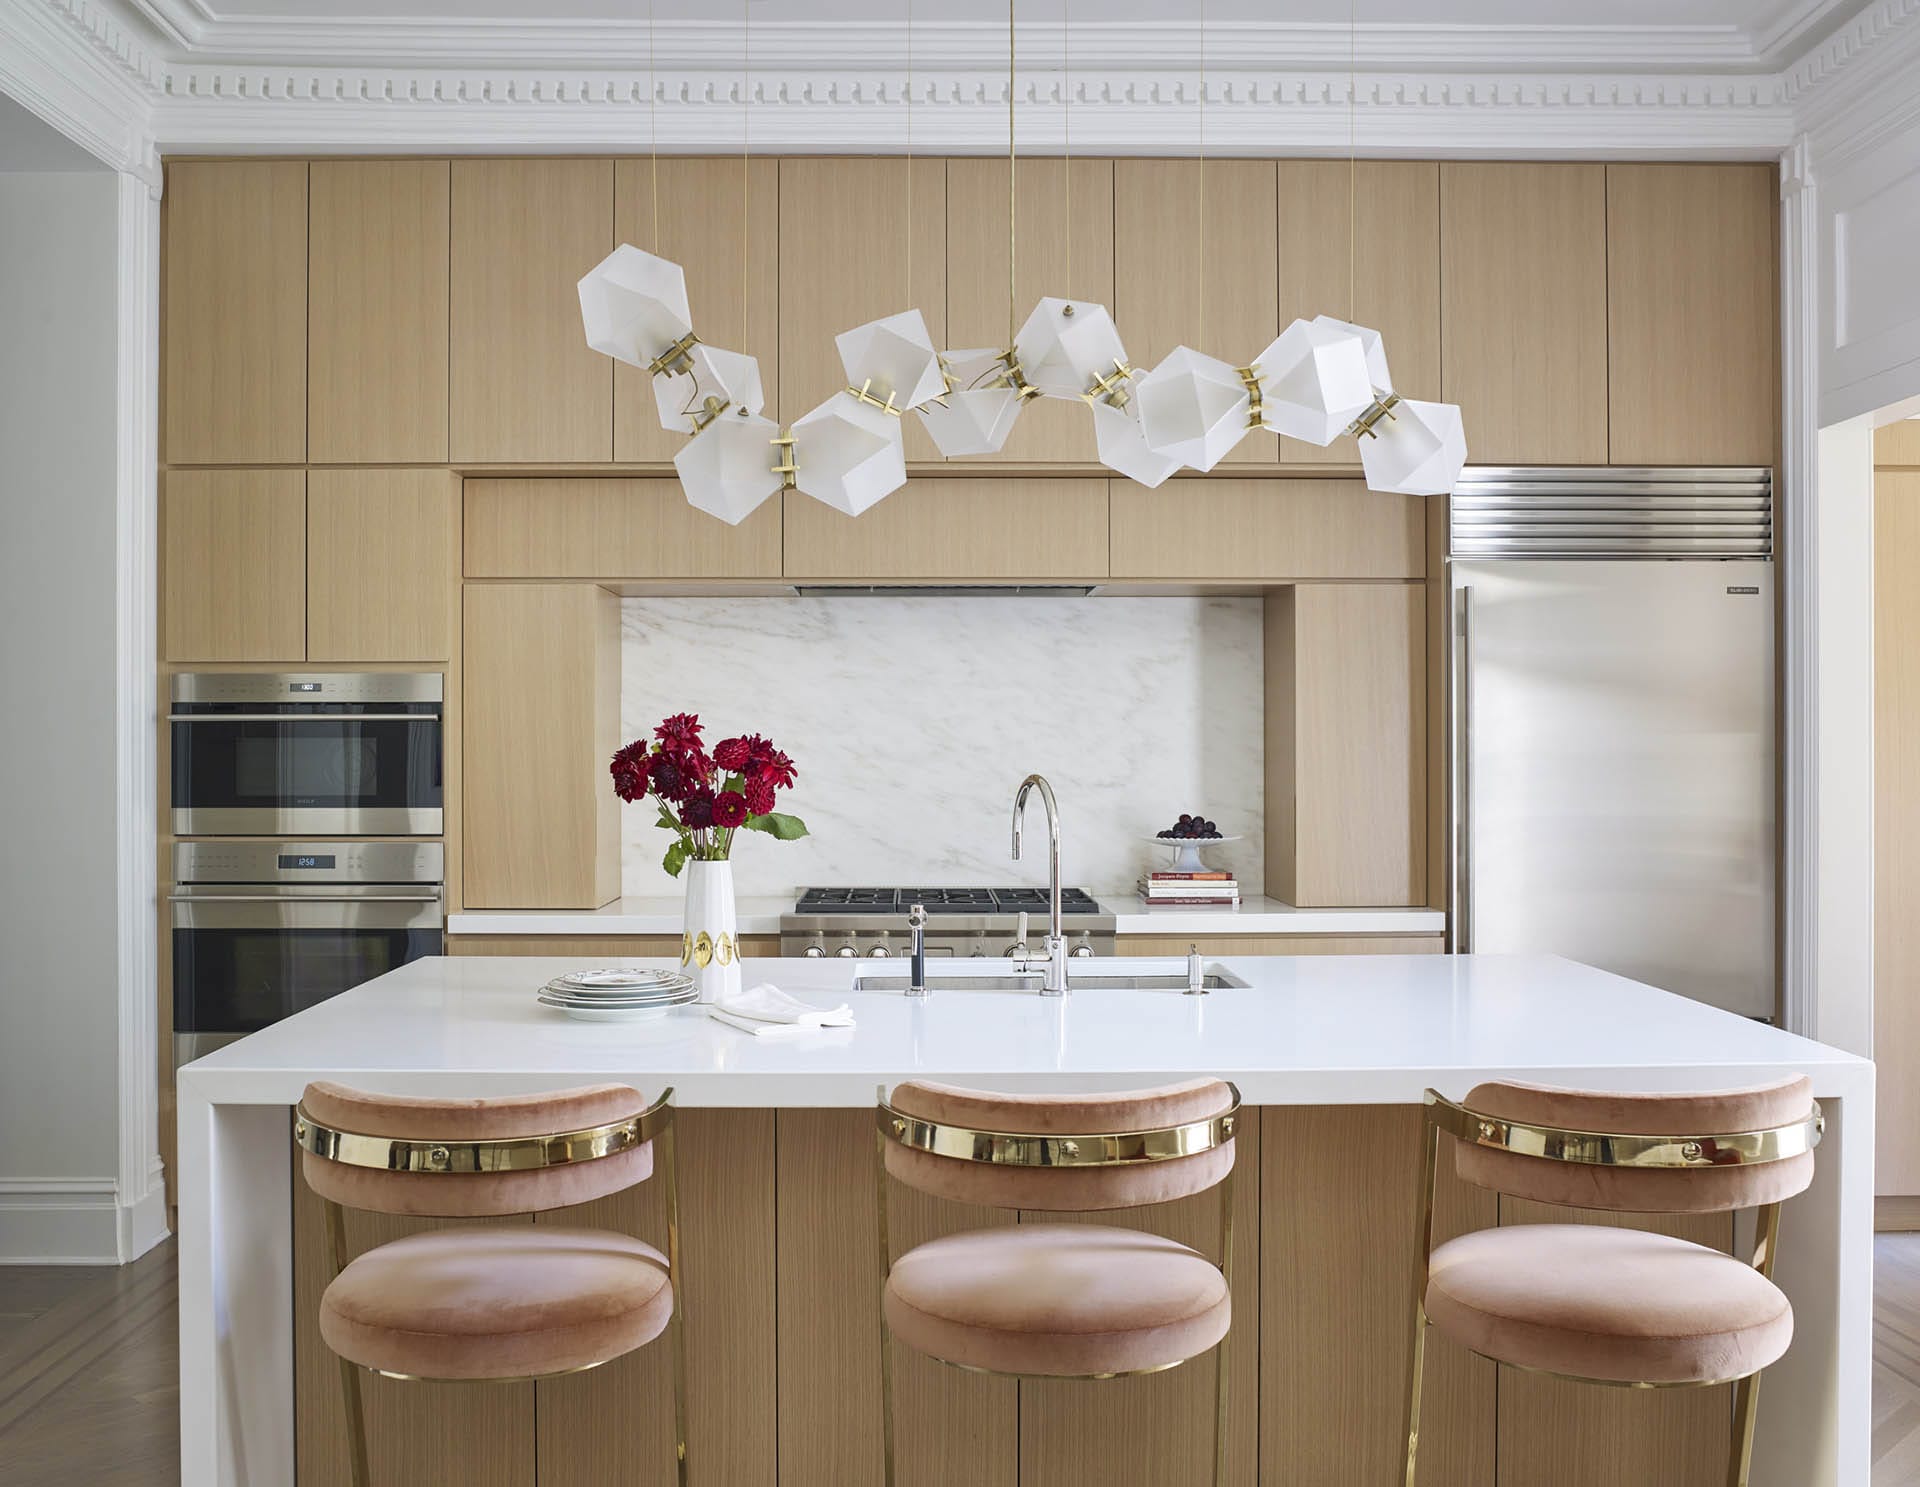 Kitchen with natural wood cabinetry, a white island and marble backsplash, restored historic crown molding, and three pink barstools at the island.